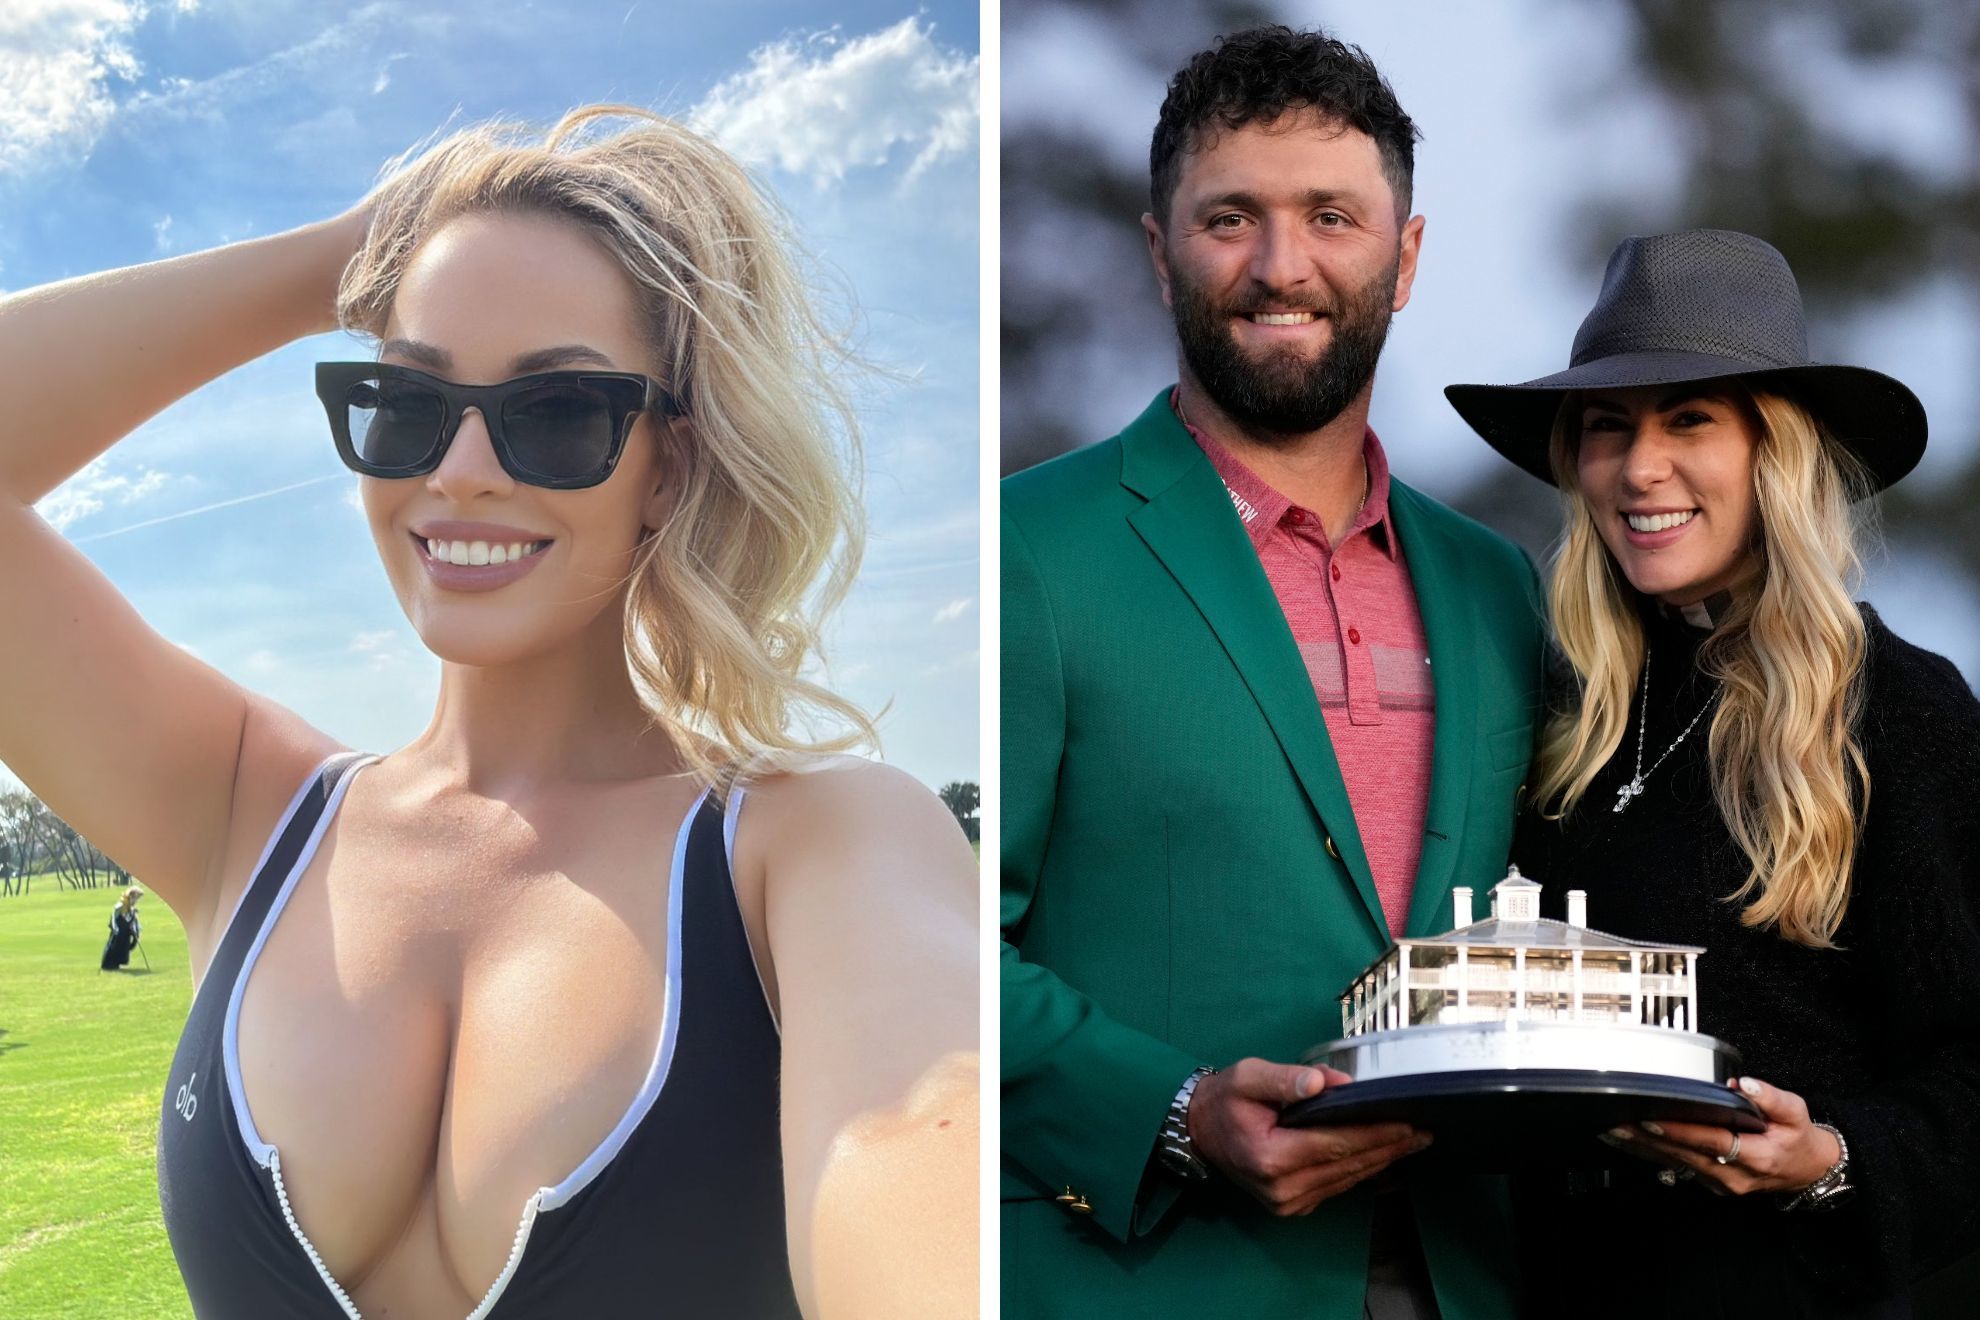 Paige Spiranac enjoys Jon Rahm's Masters victory, except for one thing